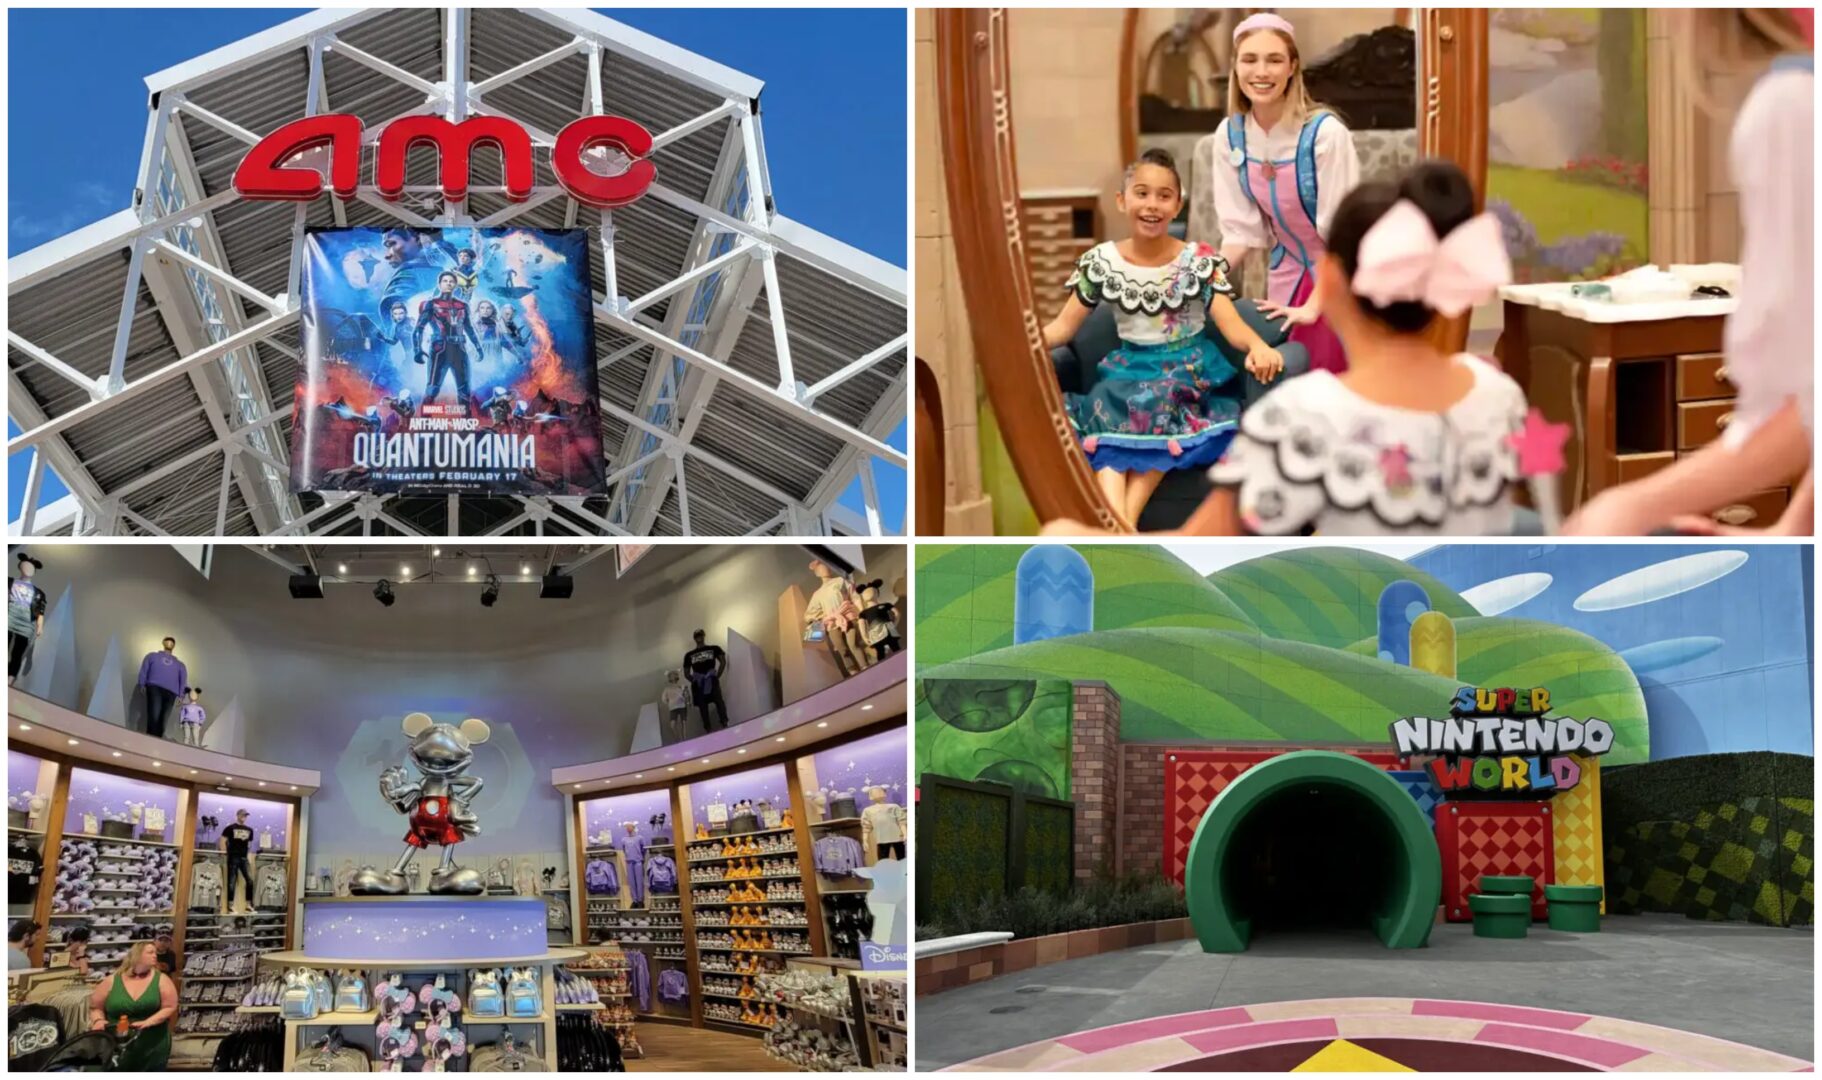 Disney News Round-Up: Pick-a-Pearl in Epcot Reopens, Disney Springs AMC24 all ready for Quantumania, The Dress Shop returns to Springs, Disneyland After Dark Returns